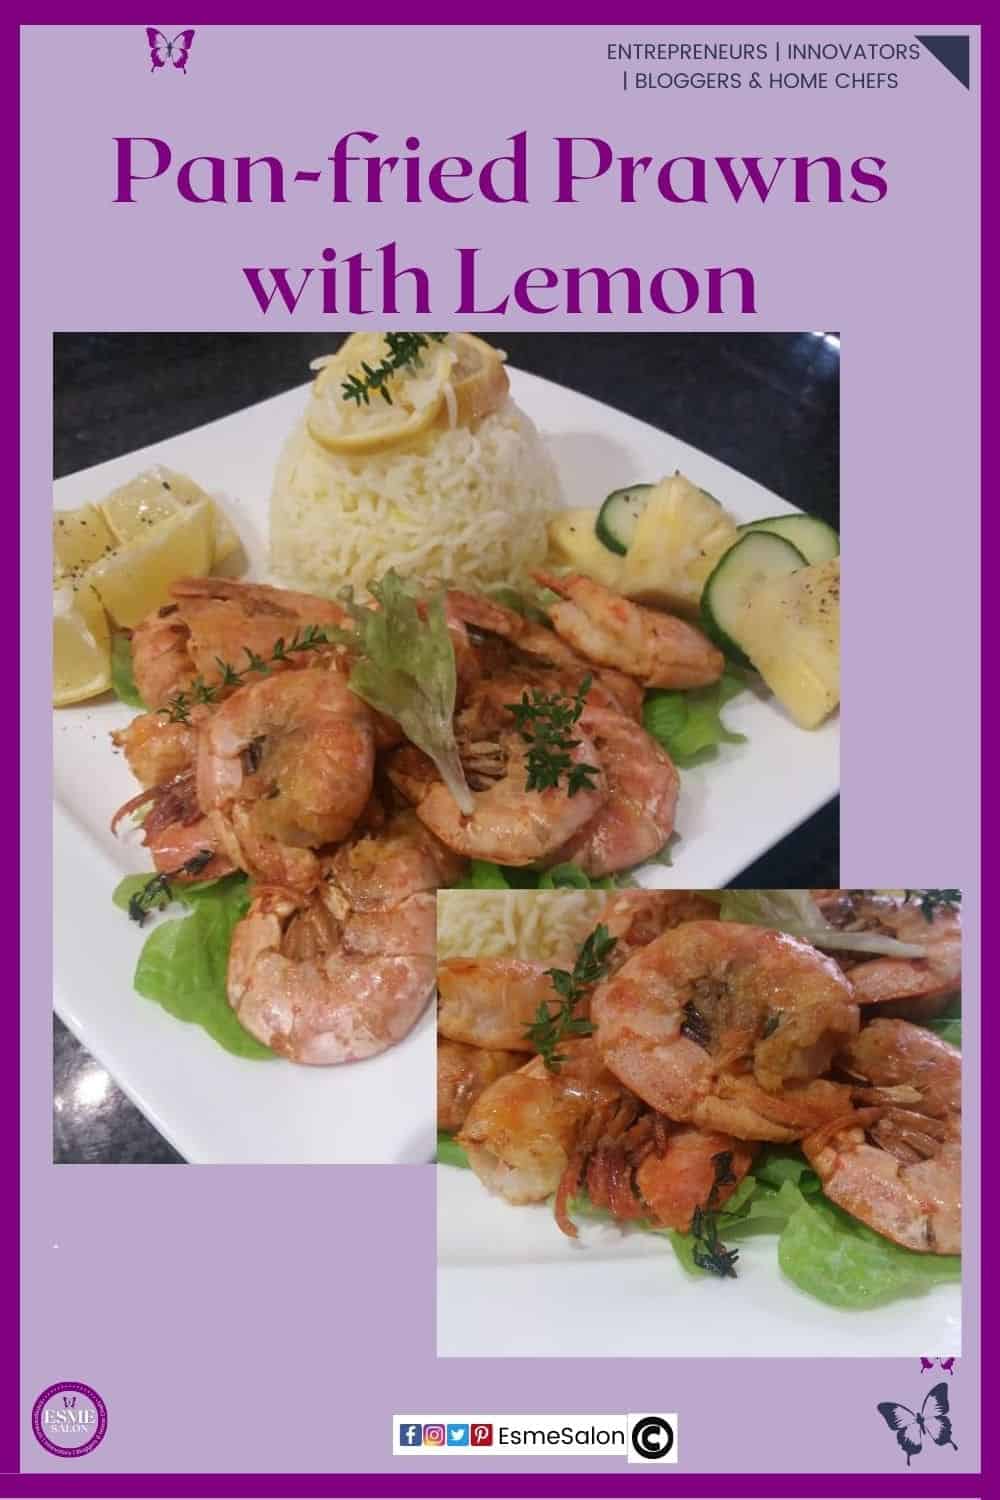 an image of a square white plate Pan-fried Prawns with Lemon and saffron rice